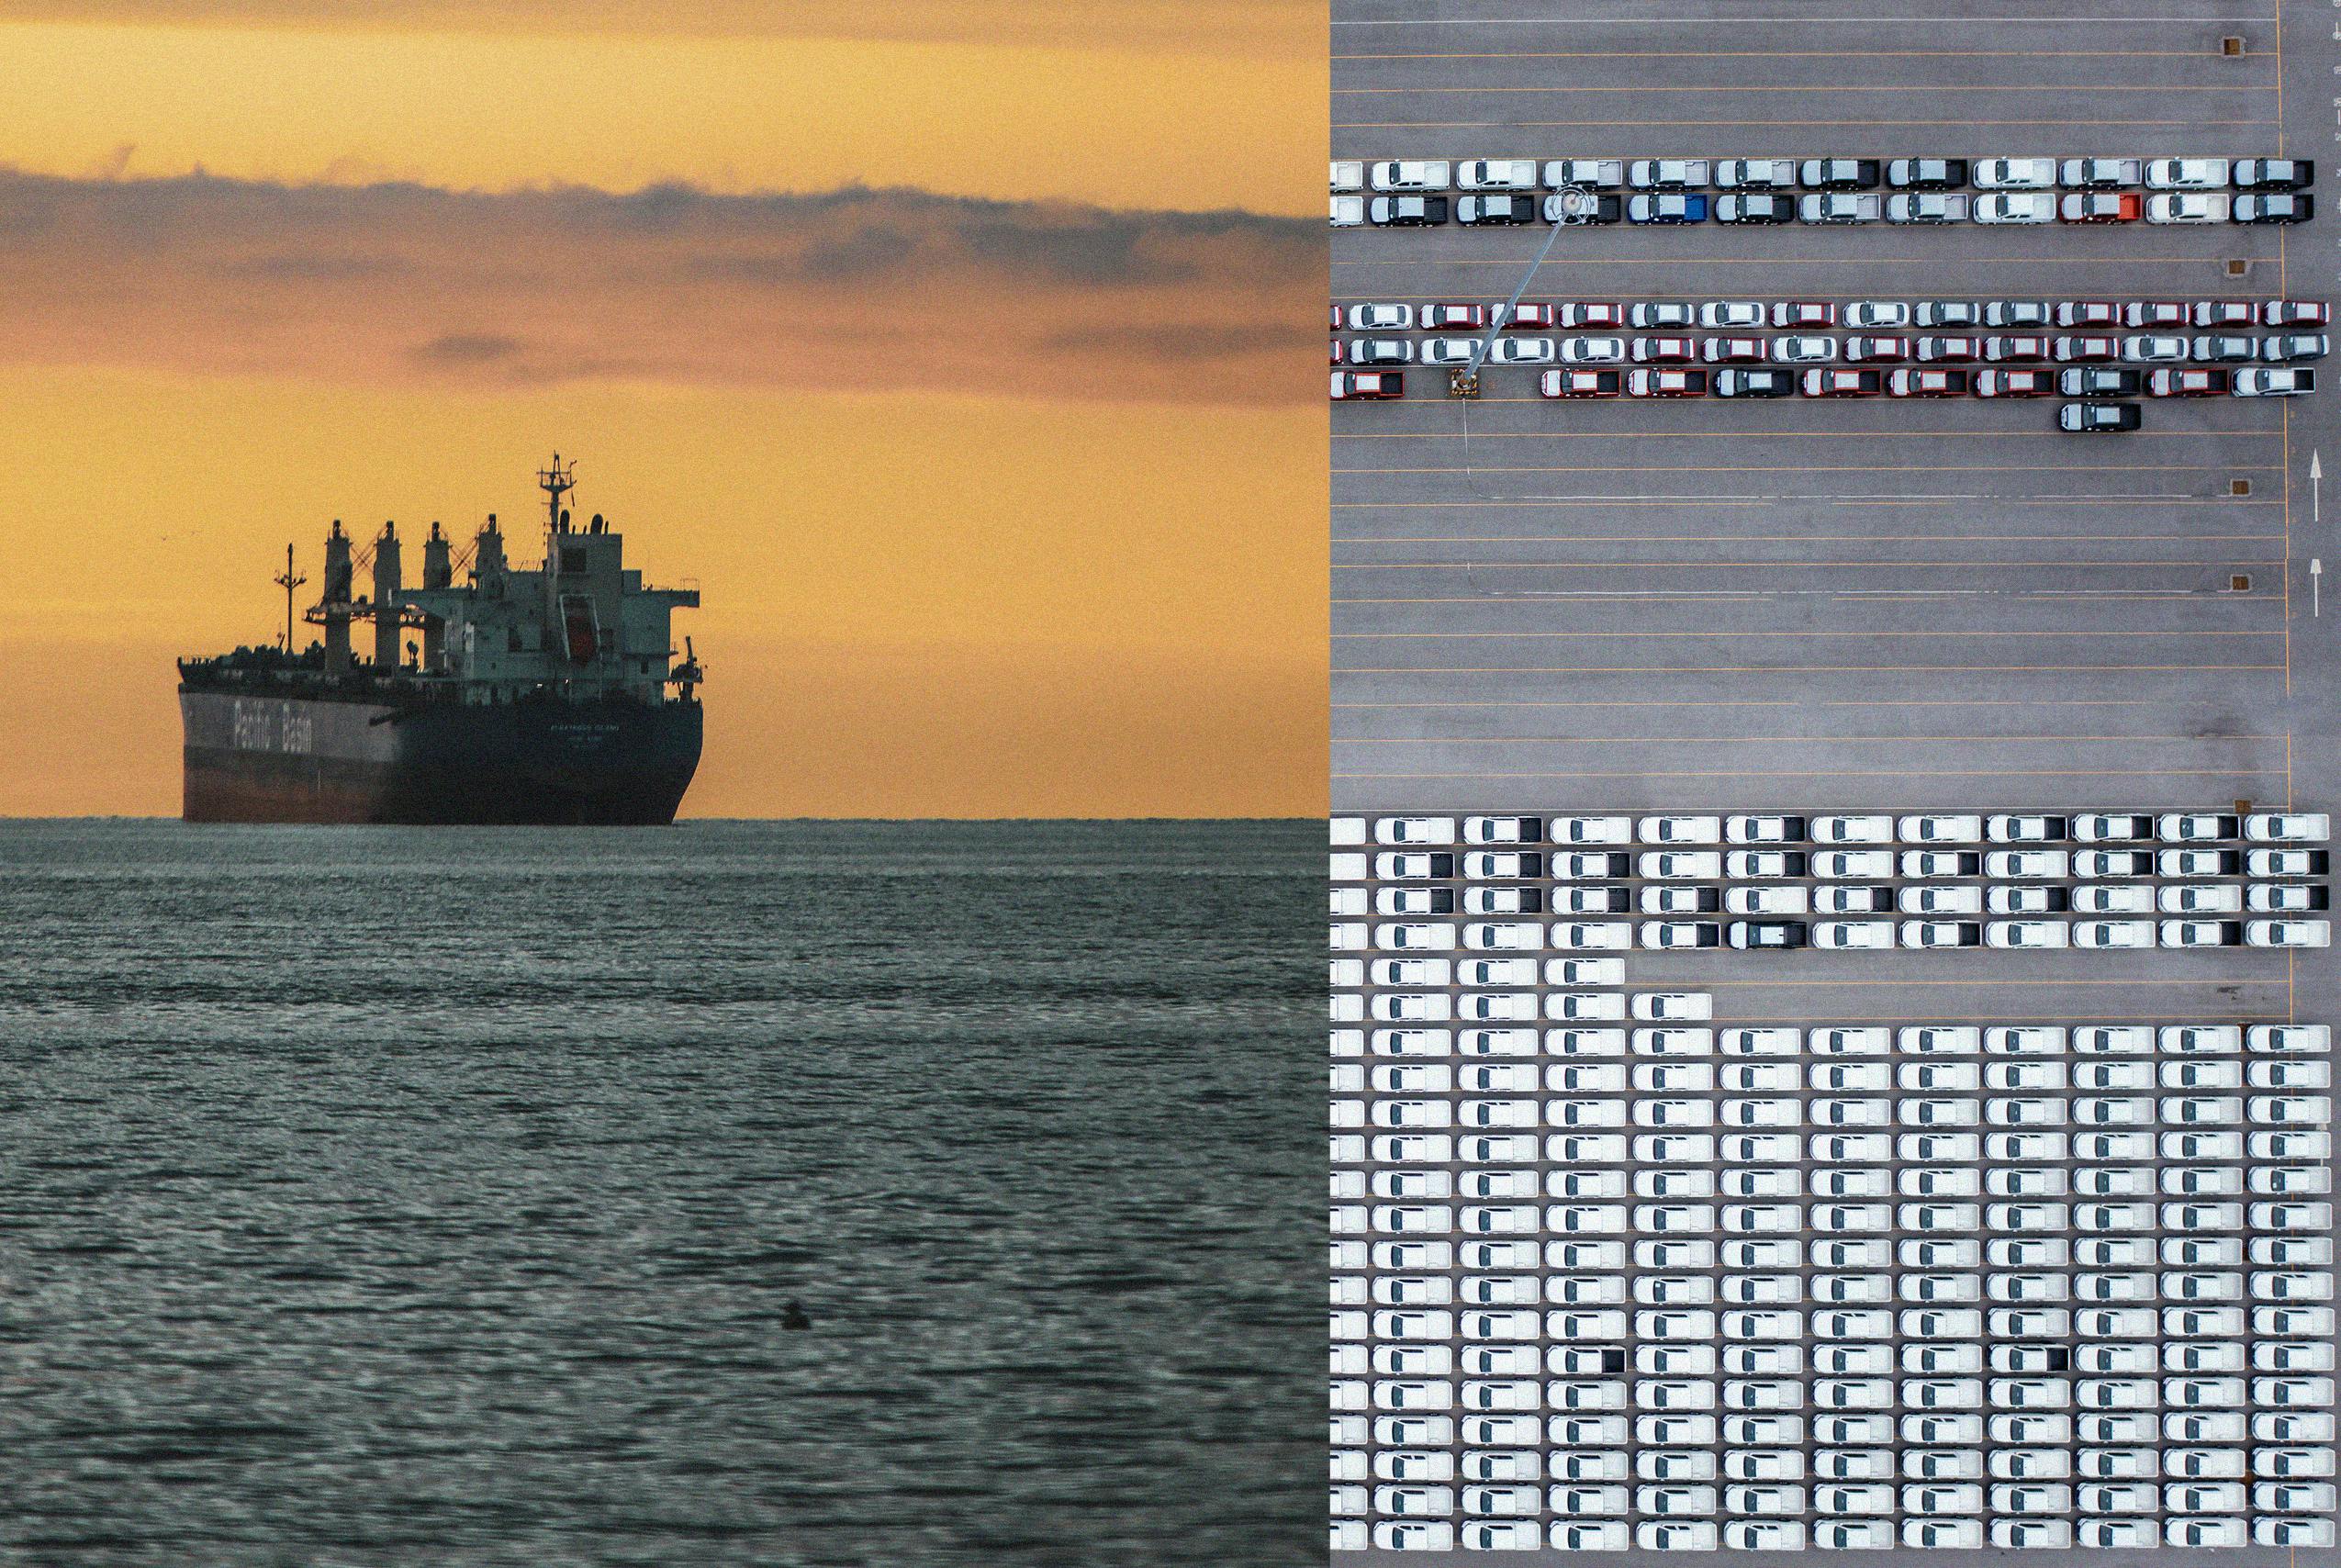 A shipping tanker, and overhead shots of shipping containers